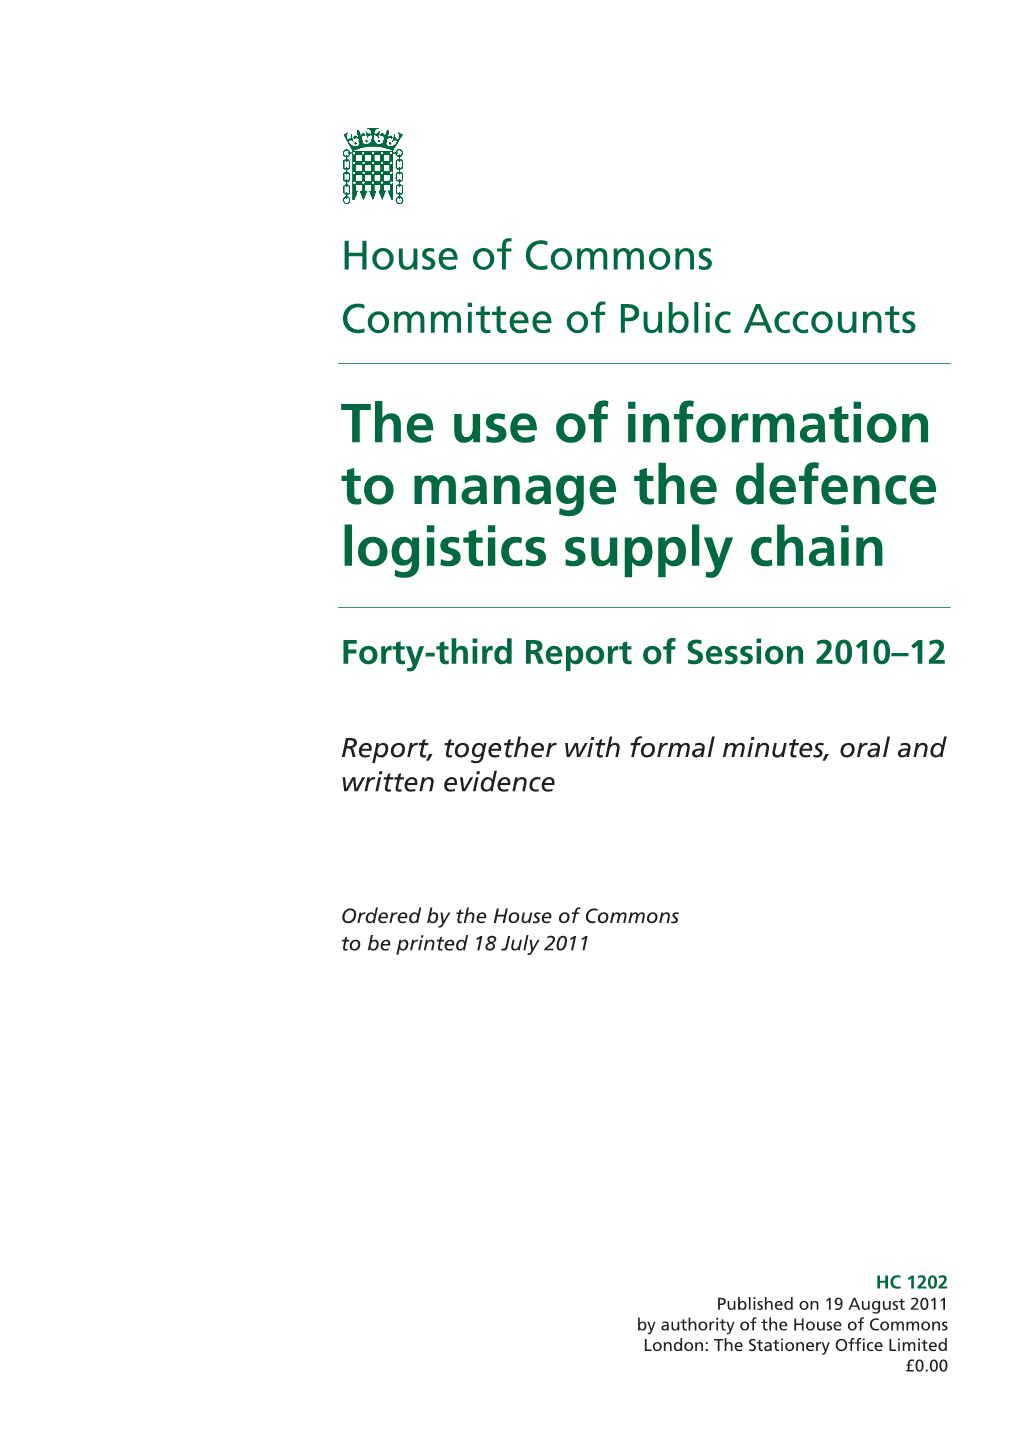 The Use of Information to Manage the Defence Logistics Supply Chain